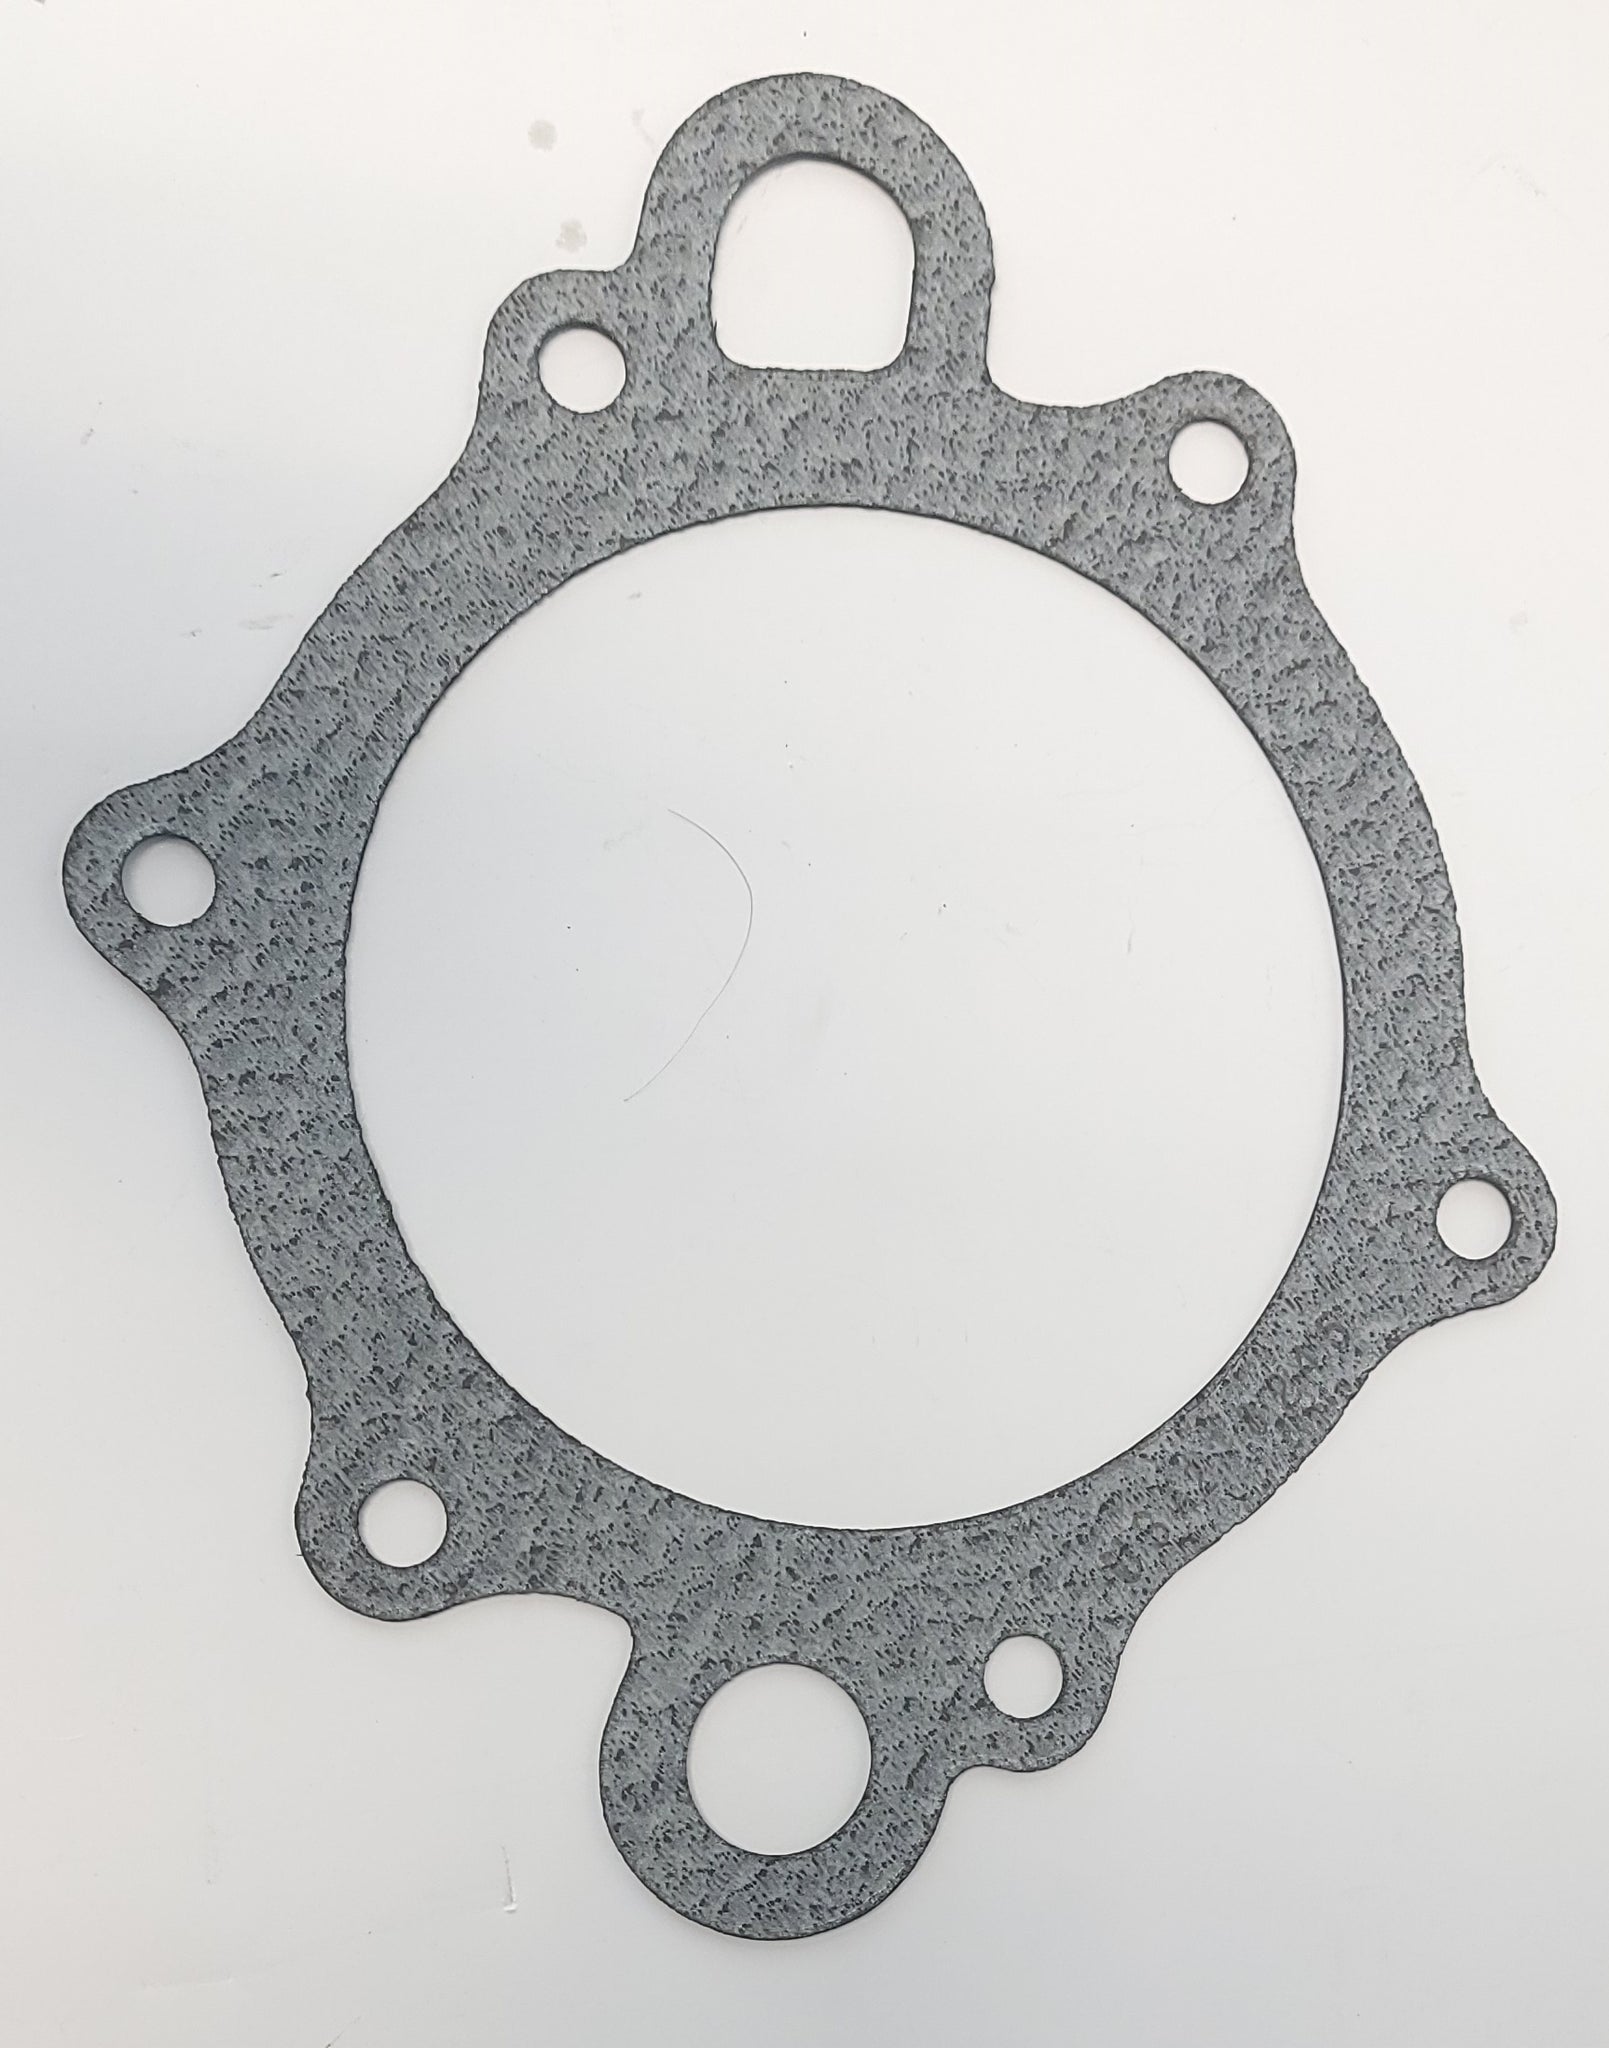 (NEW OLD STOCK) 210861 - Cummins Lubricating Oil Cooler Cover Gasket